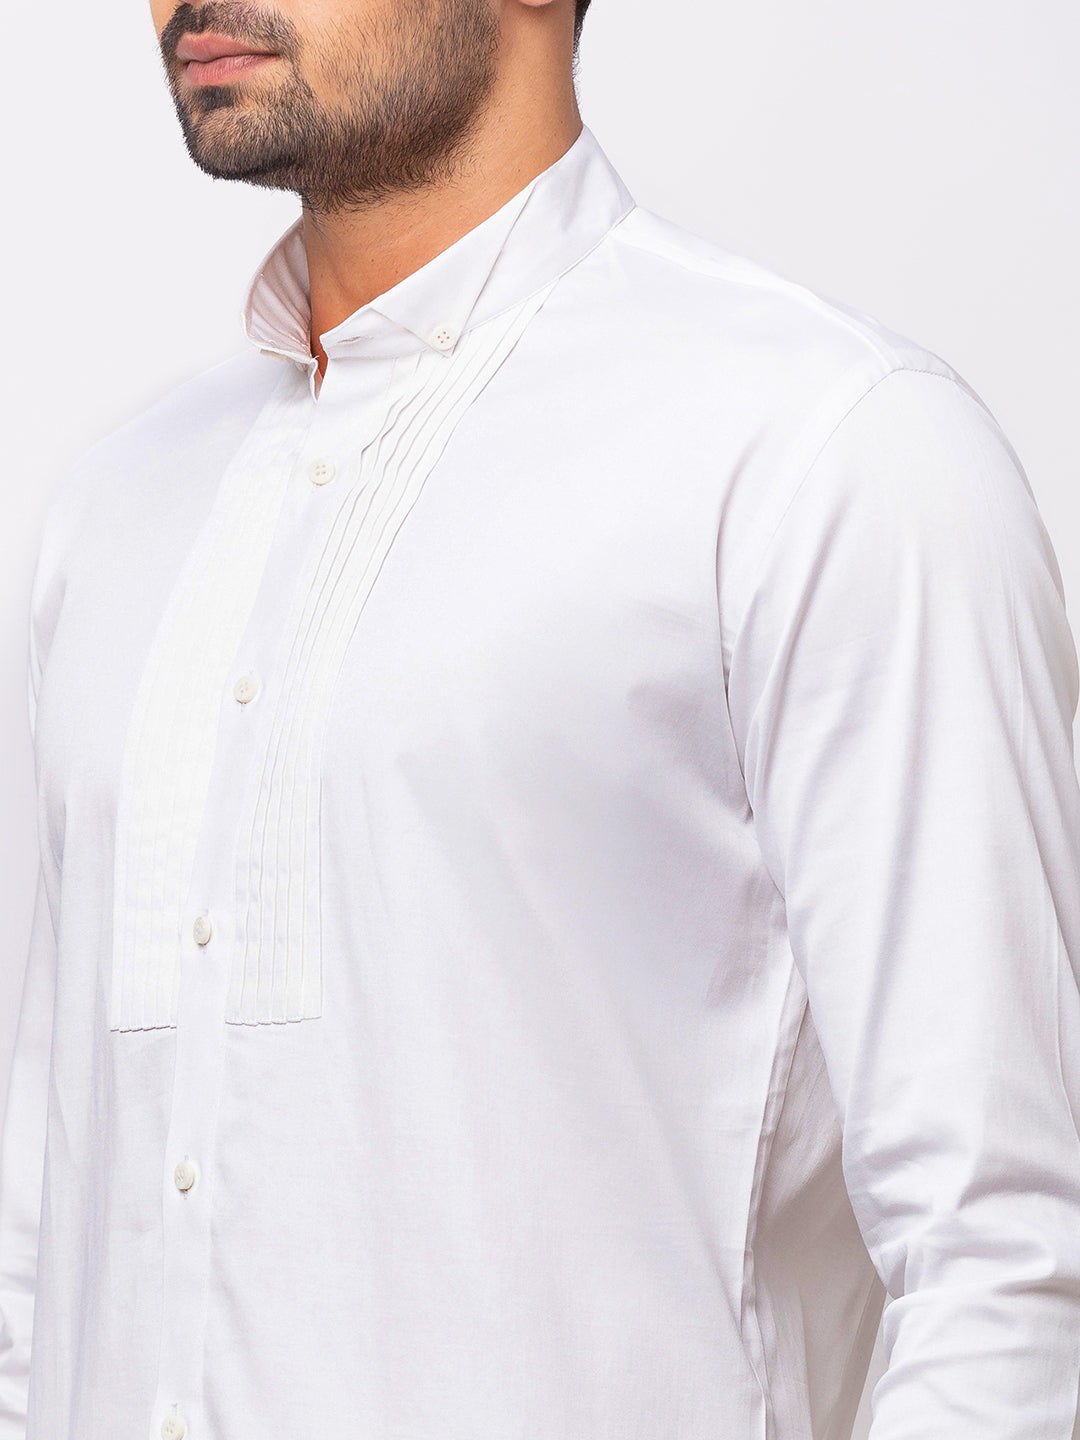 White Tuxedo Style Shirt with Wing Tip Collar